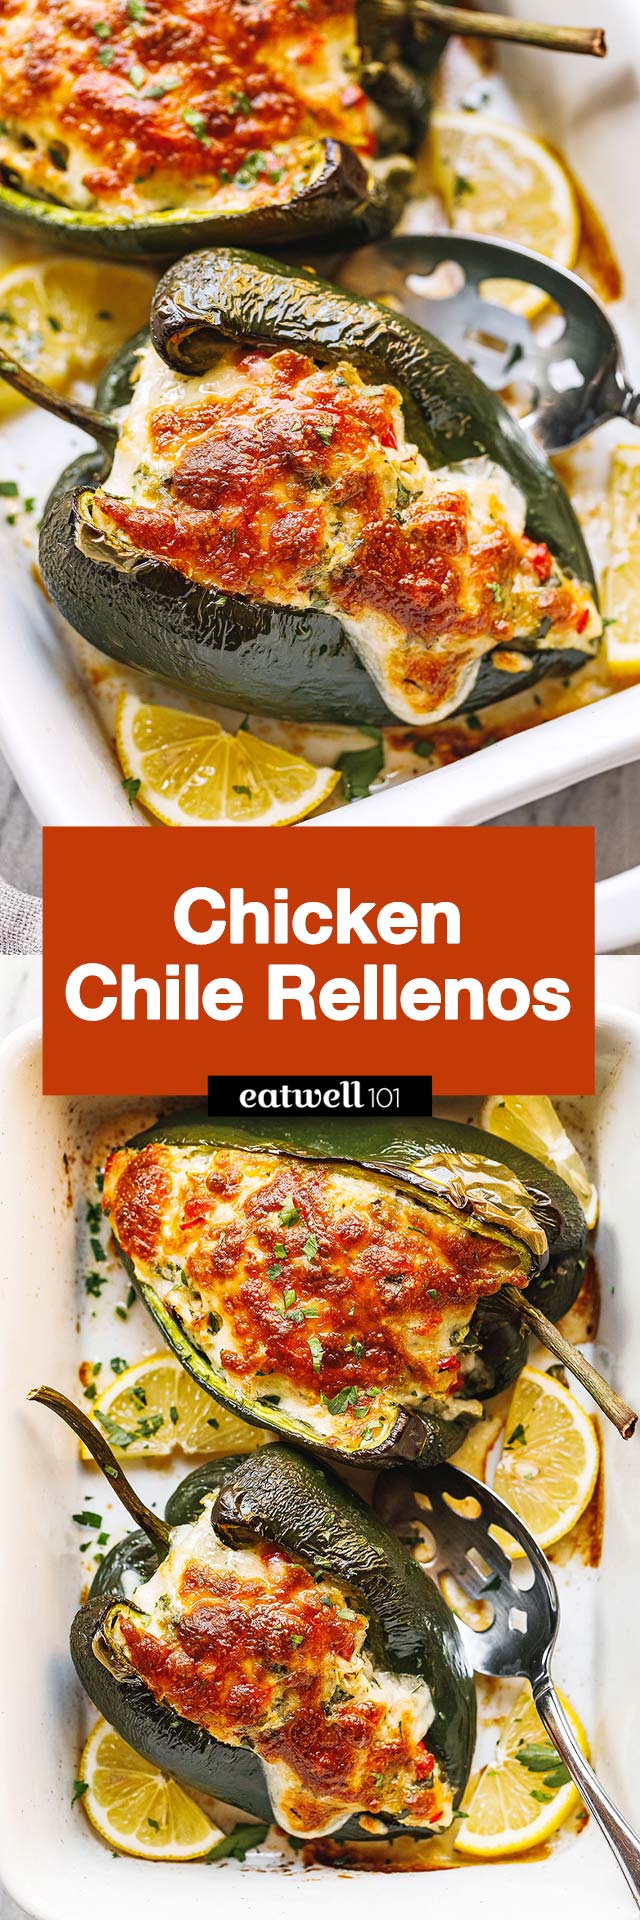 Chicken Stuffed Chile Rellenos - #chicken #chilerellenos #recipe #eatwell101 - These chicken chile Rellenos are so easy to make and out-of-this-world delicious.